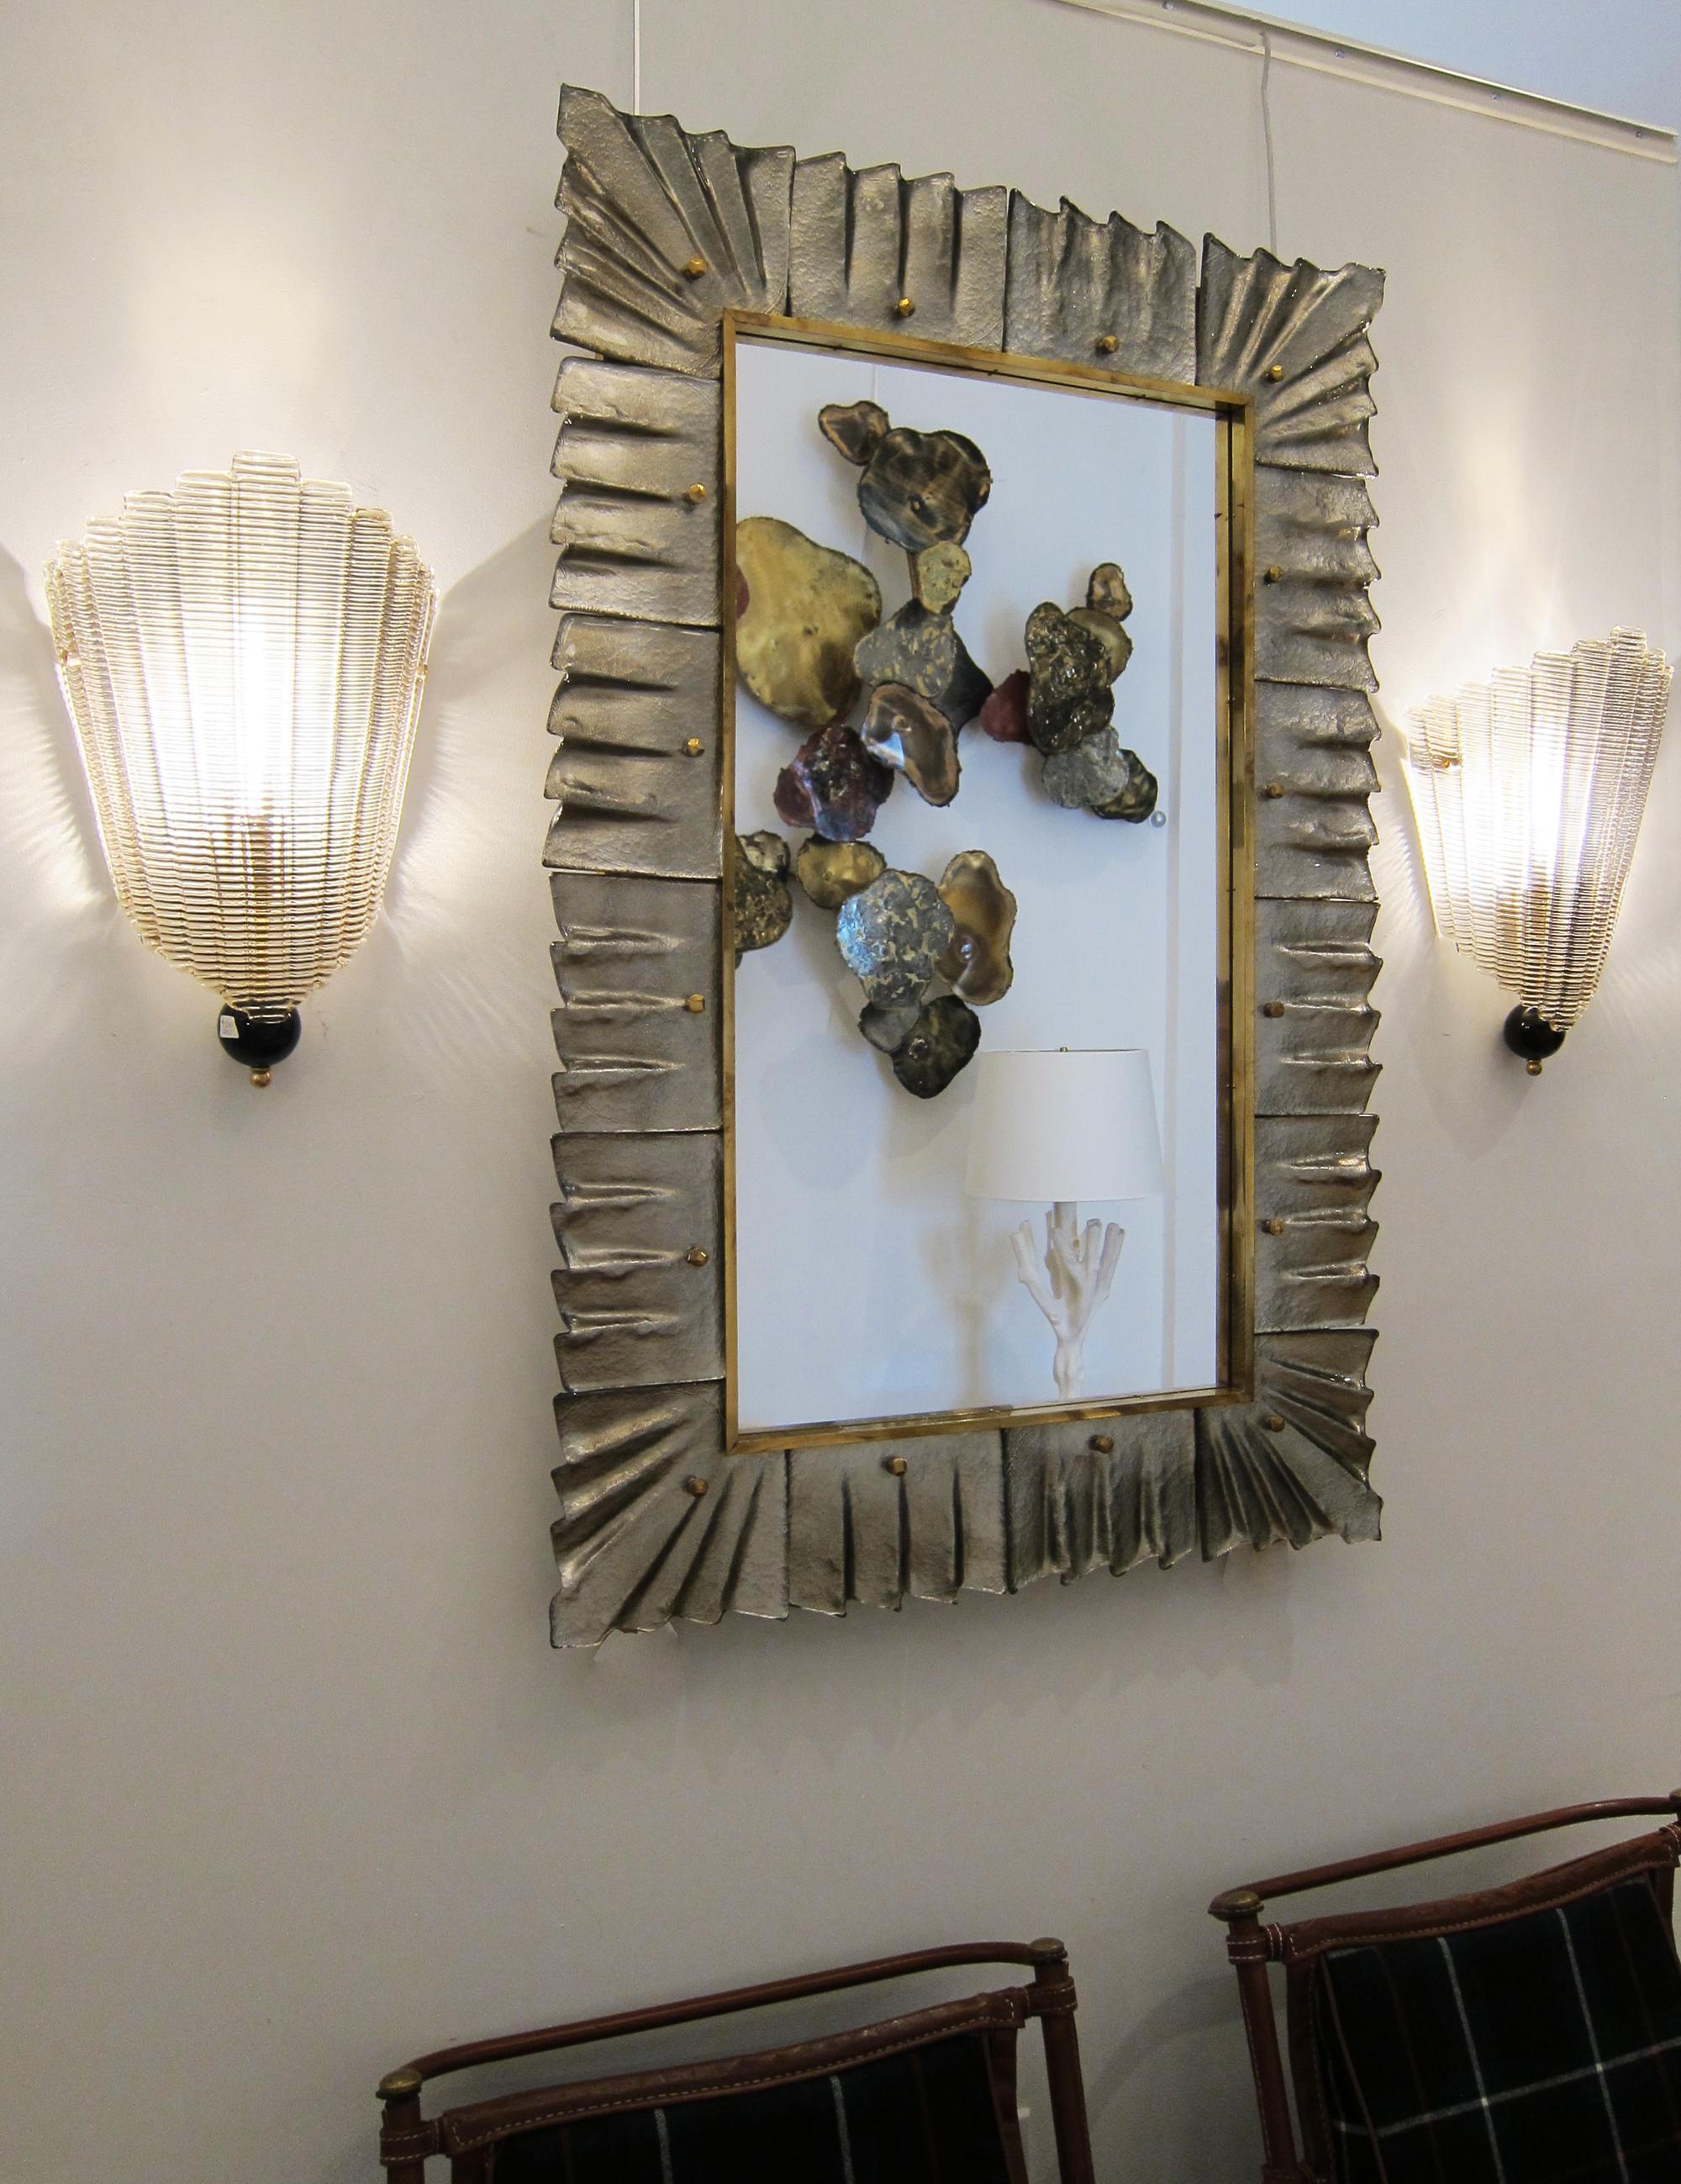 Pair of contemporary Murano silver glass framed mirror, in stock
Rectangular mirror plate surrounded with undulating glass tiles in silver color held by brass cabochons.
Luxury handcrafted by a team of artisans in Venice, Italy.
Can be easily hung